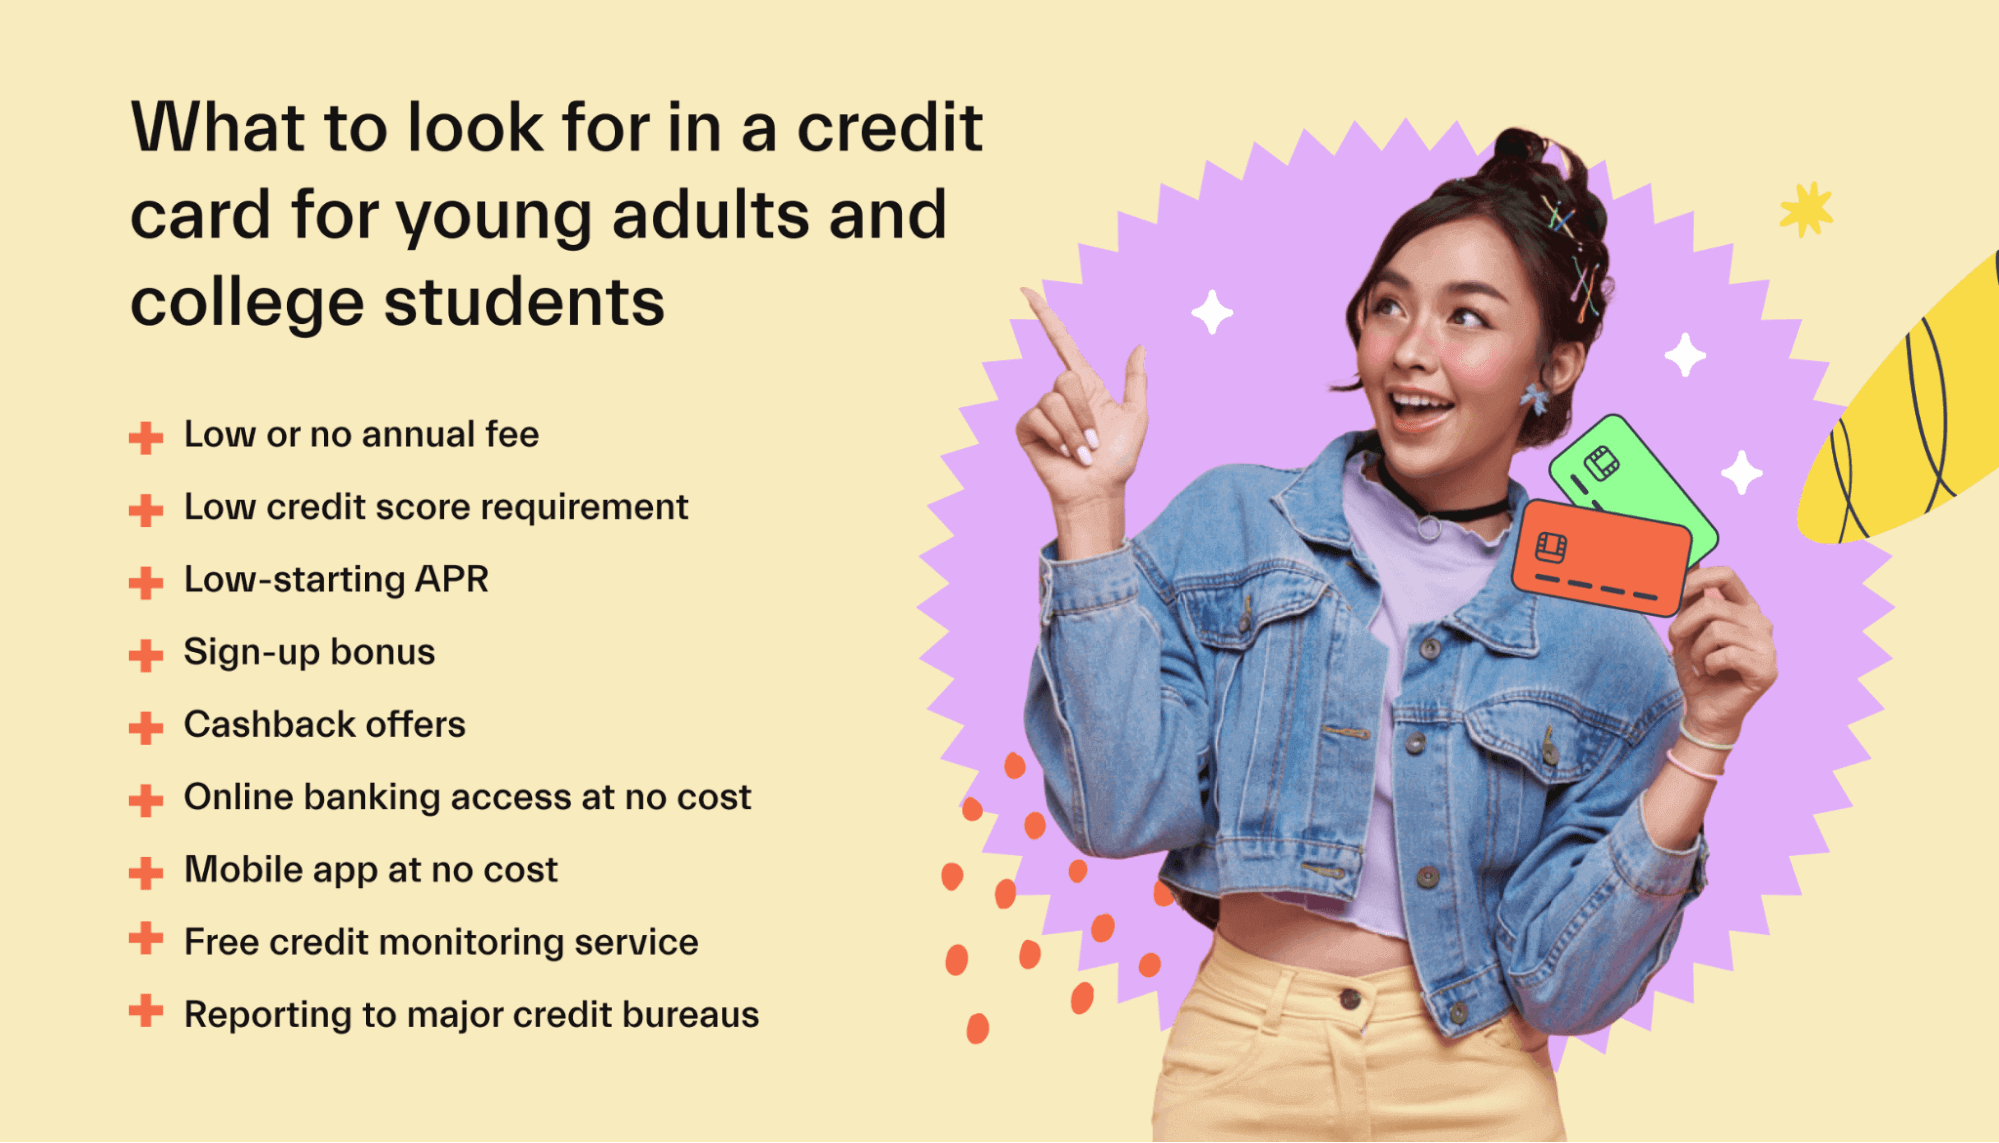 What to Look For in a Credit Card For Young Adults and College Students